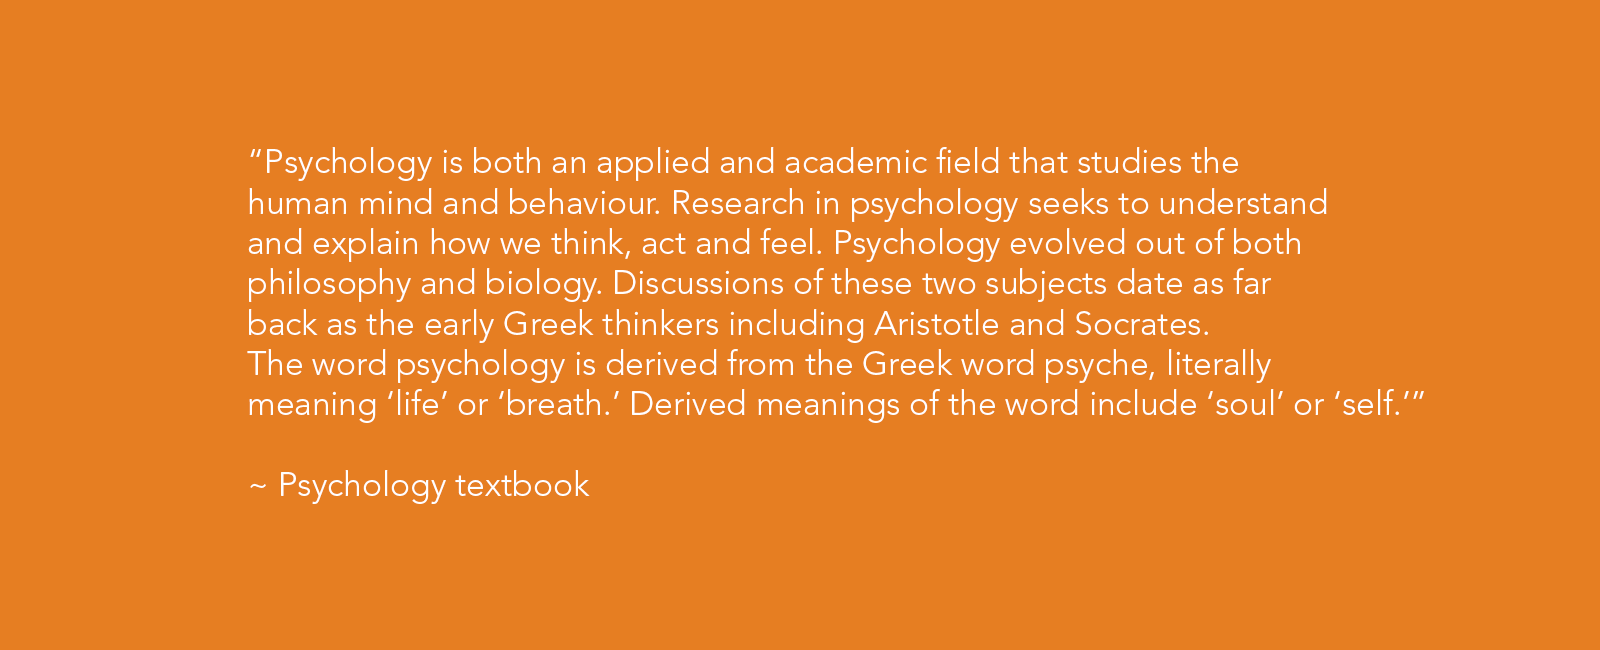 a-level-psychology-options-promo-quote